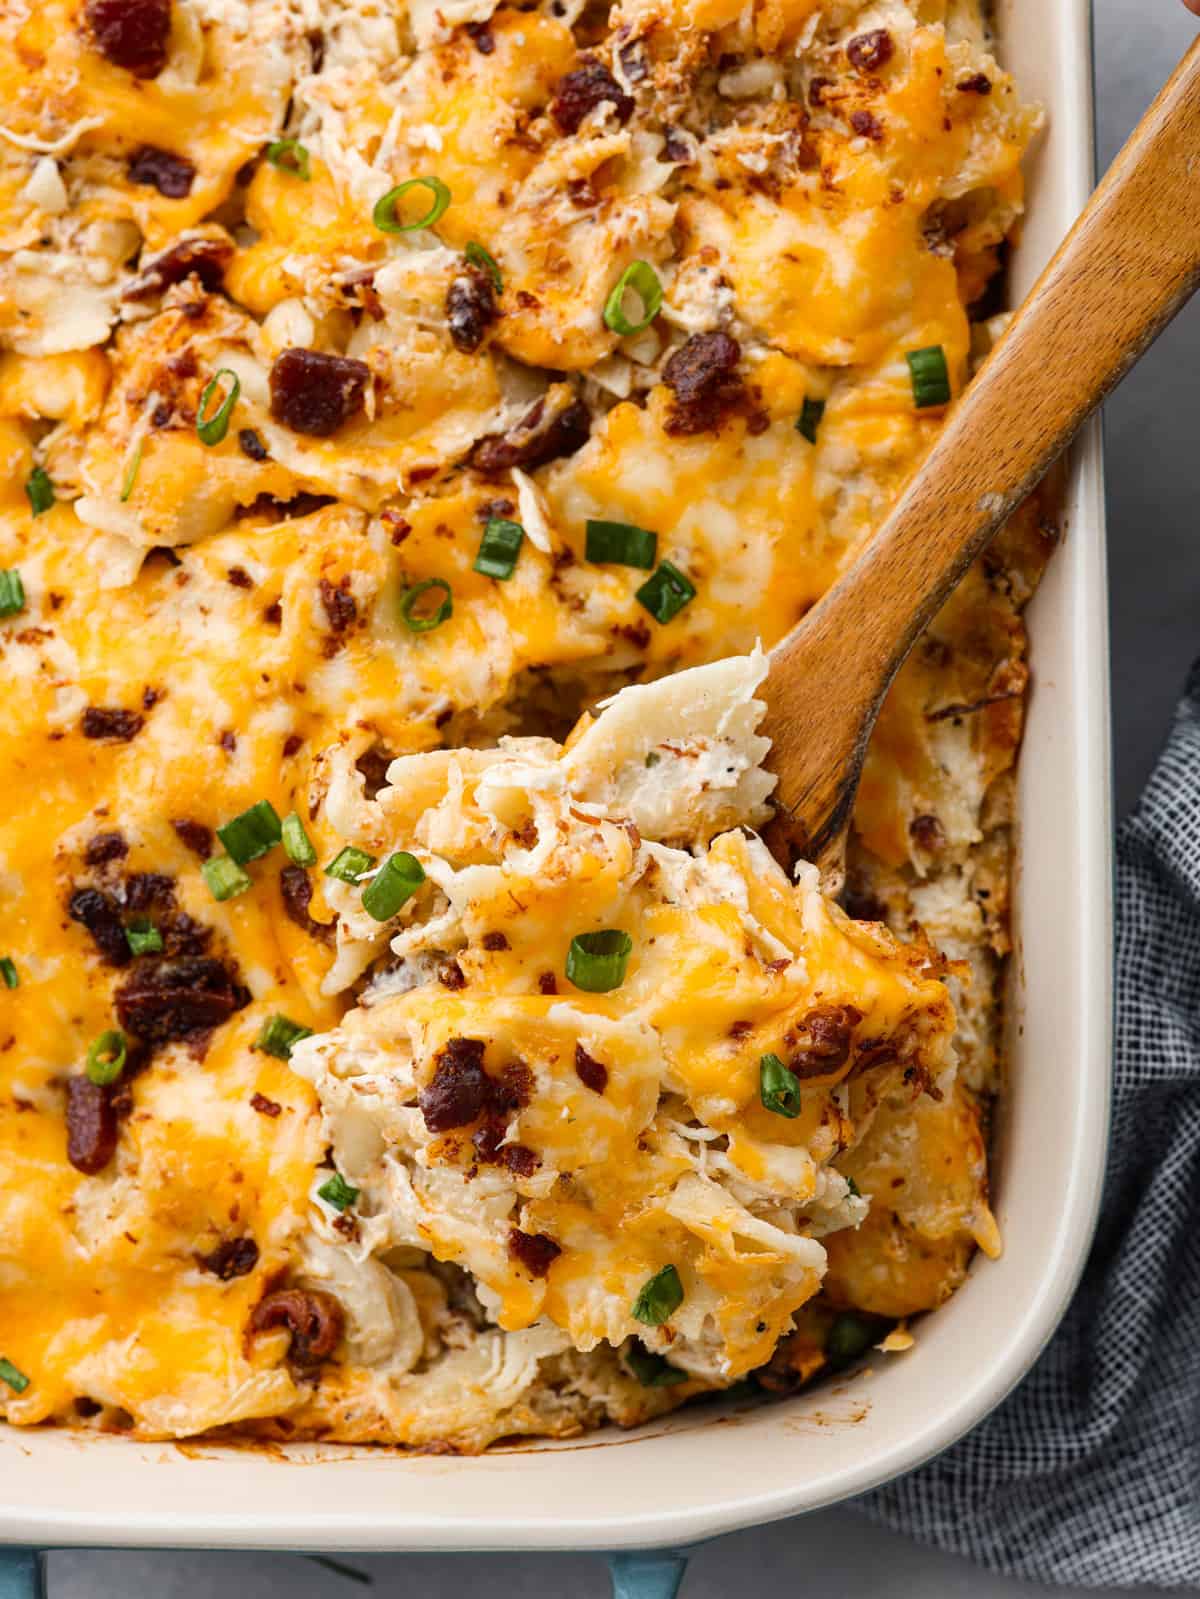 13 Casserole Dishes for Baking Your Comfort Food Favorites